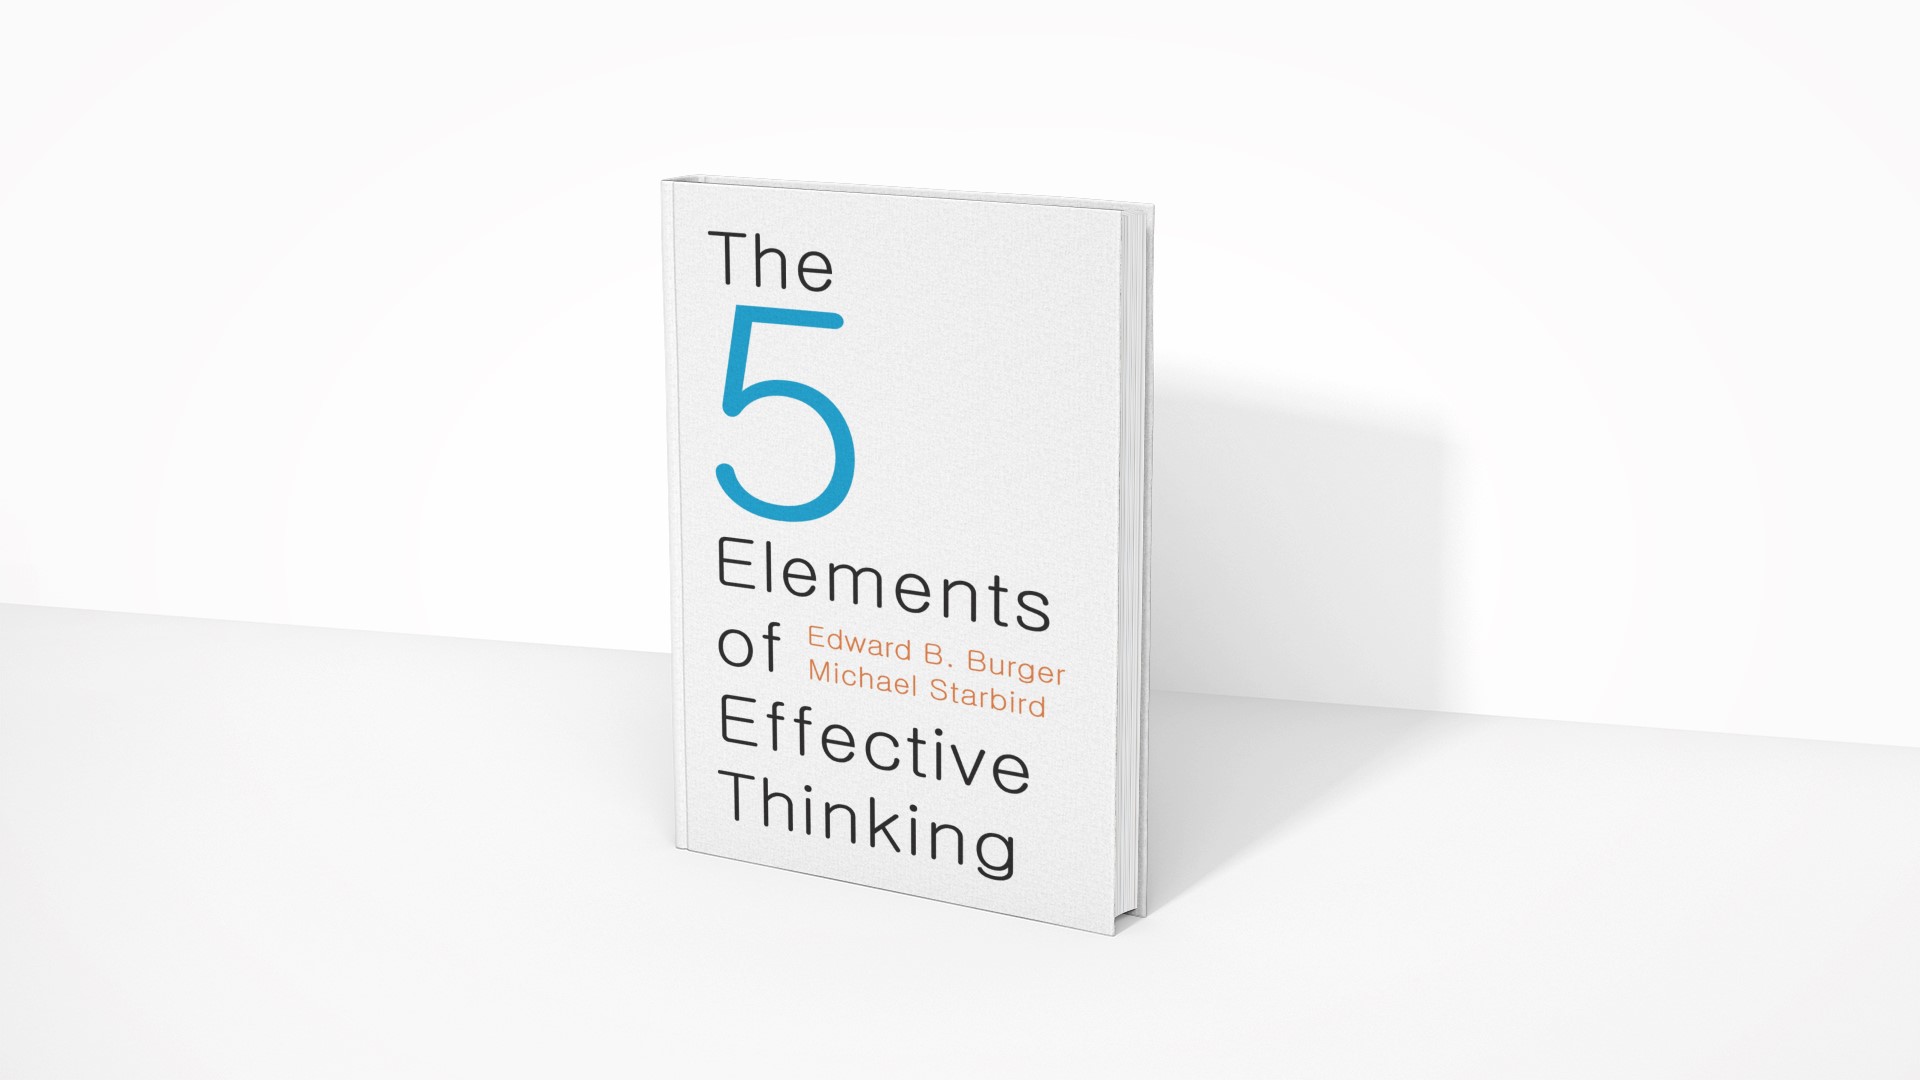 The Five Elements of Effective Thinking - Edward B. Burger and Michael Starbird